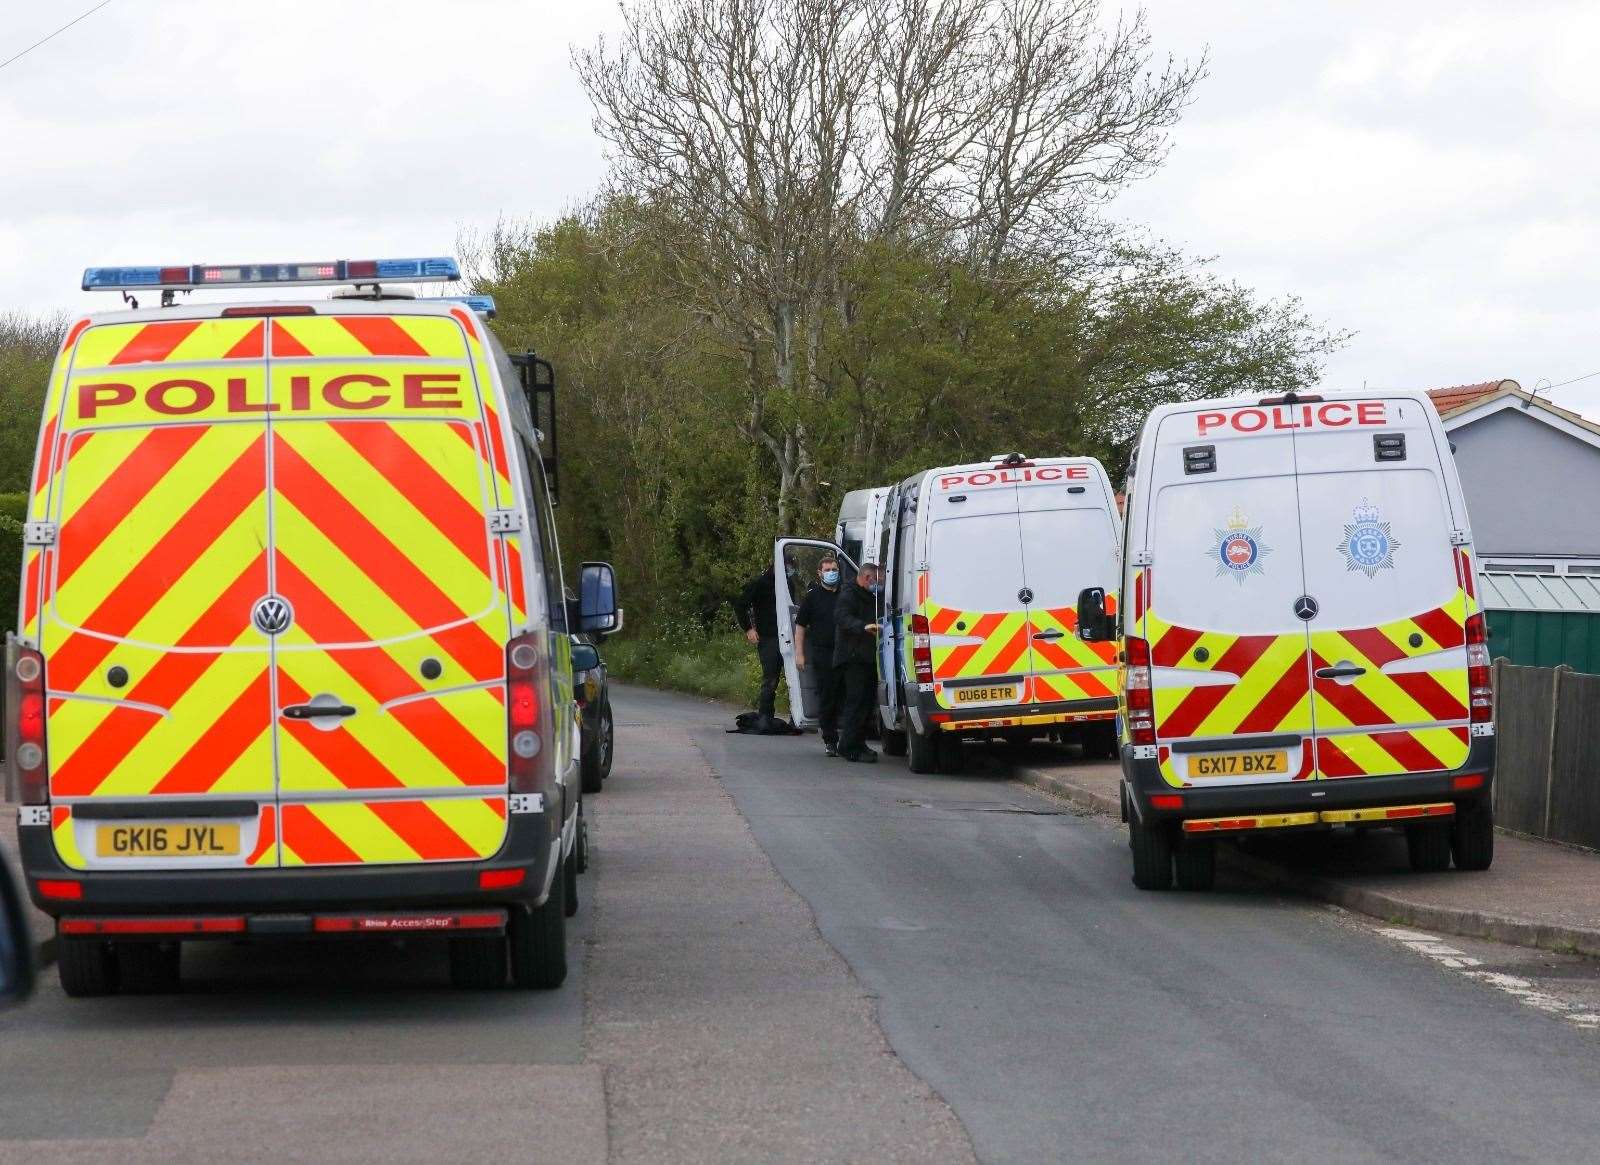 Police officers searching in Aylesham as part of the Julia James murder investigation. Picture: UKNiP